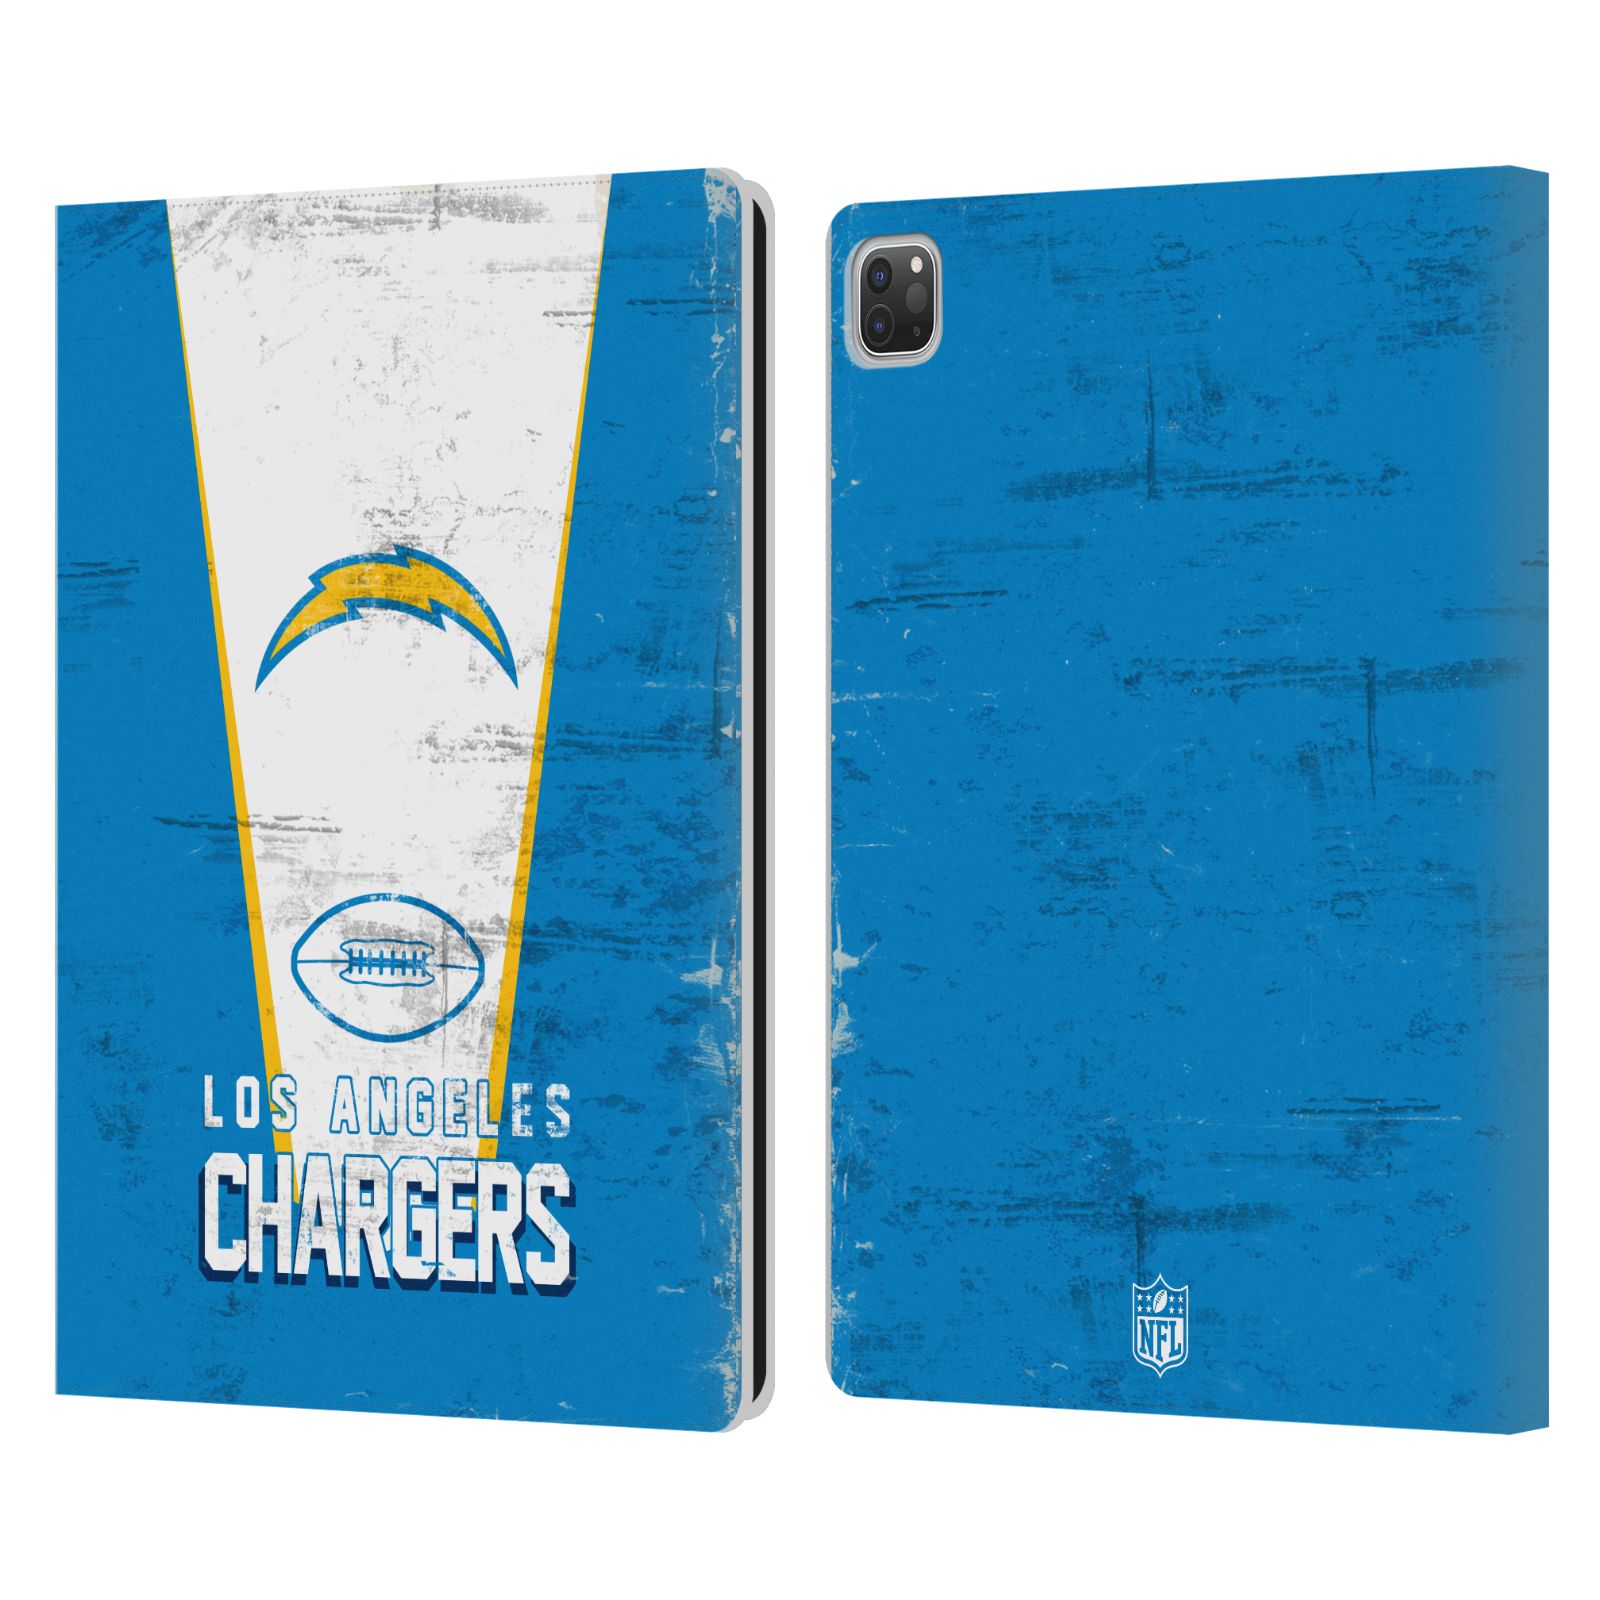 OFFICIAL NFL LOS ANGELES CHARGERS LOGO ART LEATHER BOOK CASE FOR APPLE iPAD